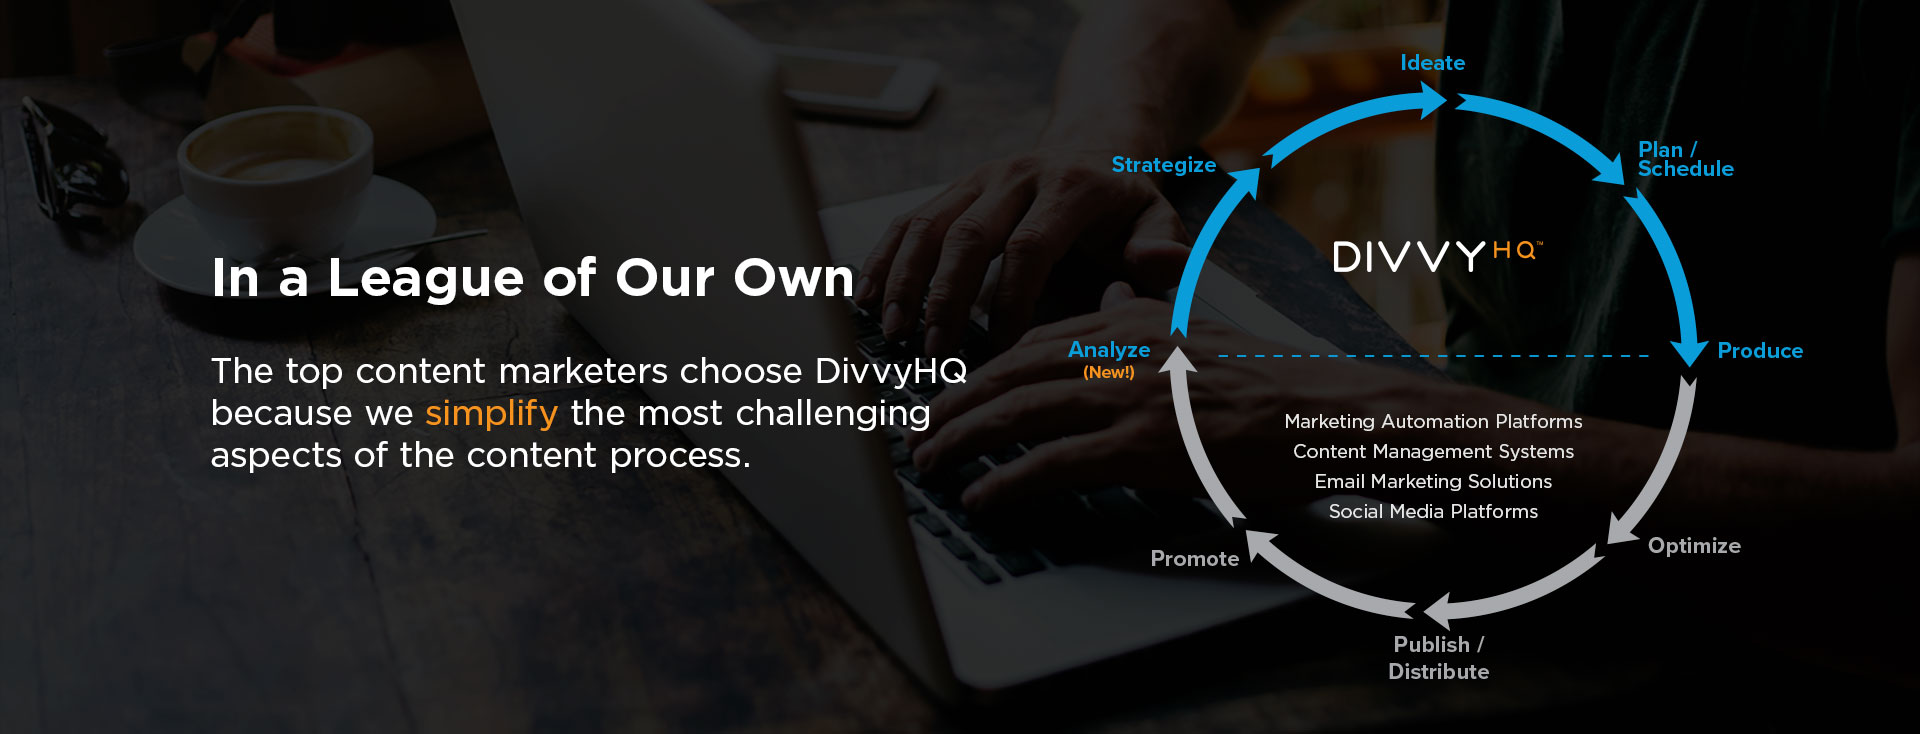 In a League of Our Own. The top content marketers choose DivvyHQ because we simplify the most challenging aspects of the content process.